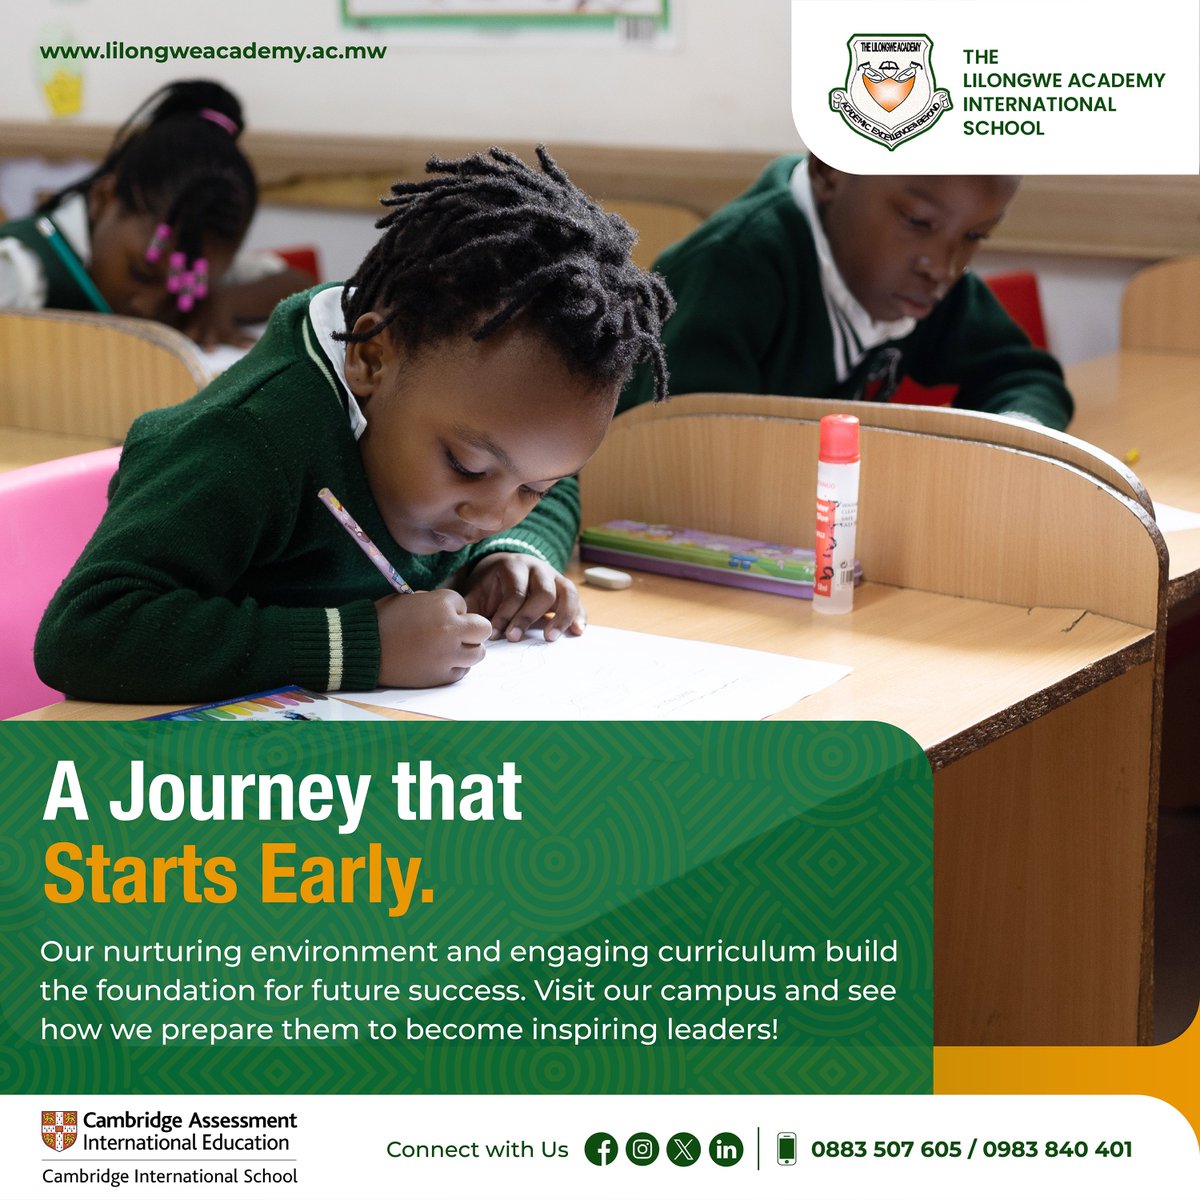 WE START EARLY 🎒⛅️

Our nurturing environment and engaging curriculum build the foundation for future success.

Learn more about our Early Years and Primary program and their inspiring future at 🌐: lilongweacademy.ac.mw

#EnrolToday #Cambidge #InternationalSchool